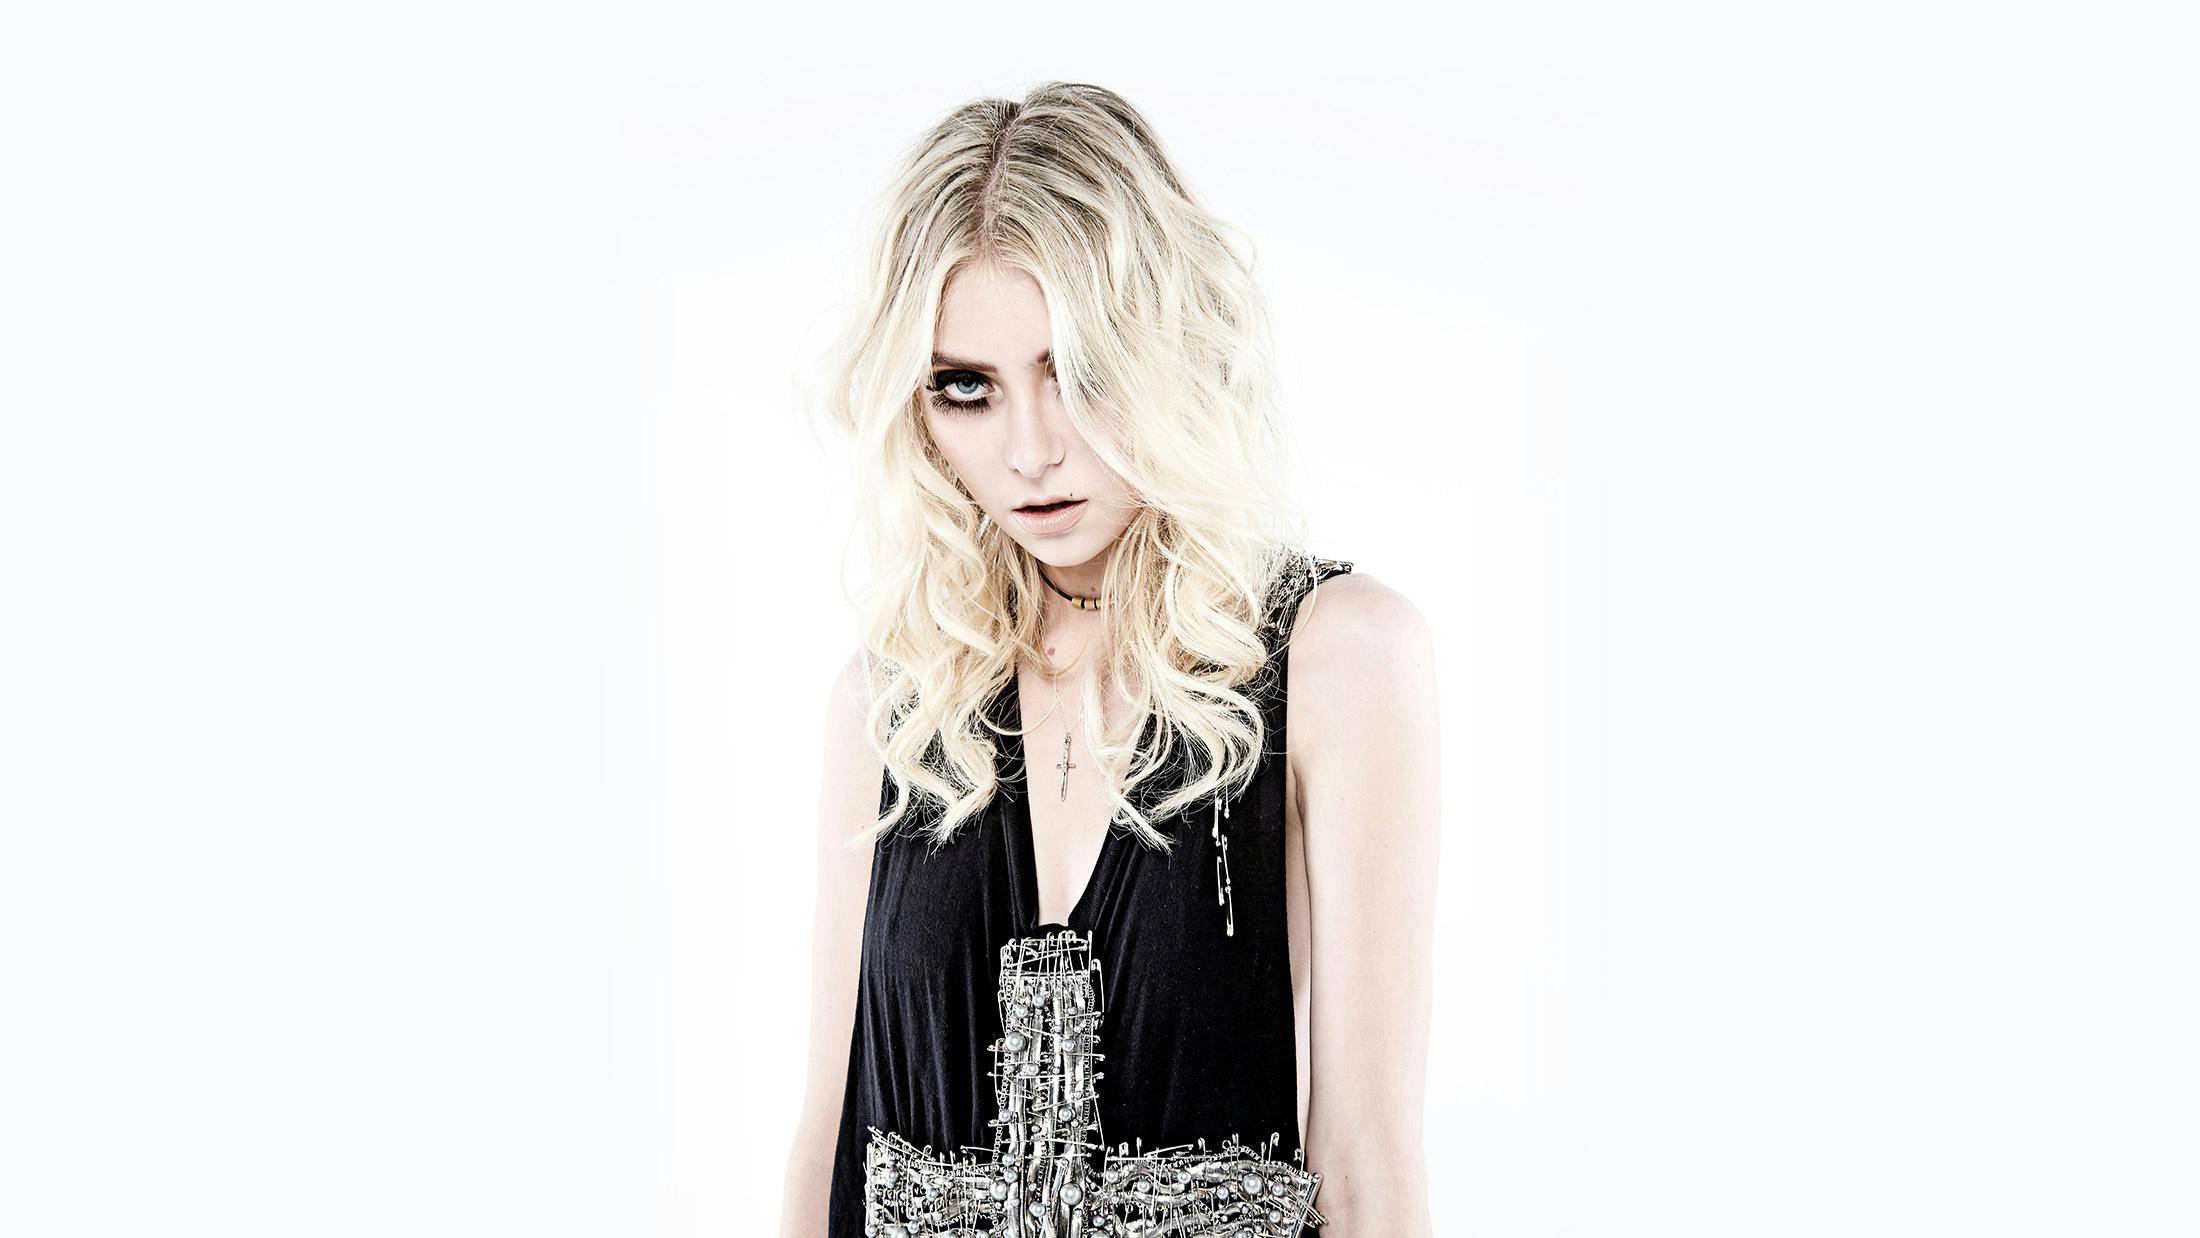 The Pretty Reckless' Taylor Momsen: “This year has taught me to appreciate the small things in life”